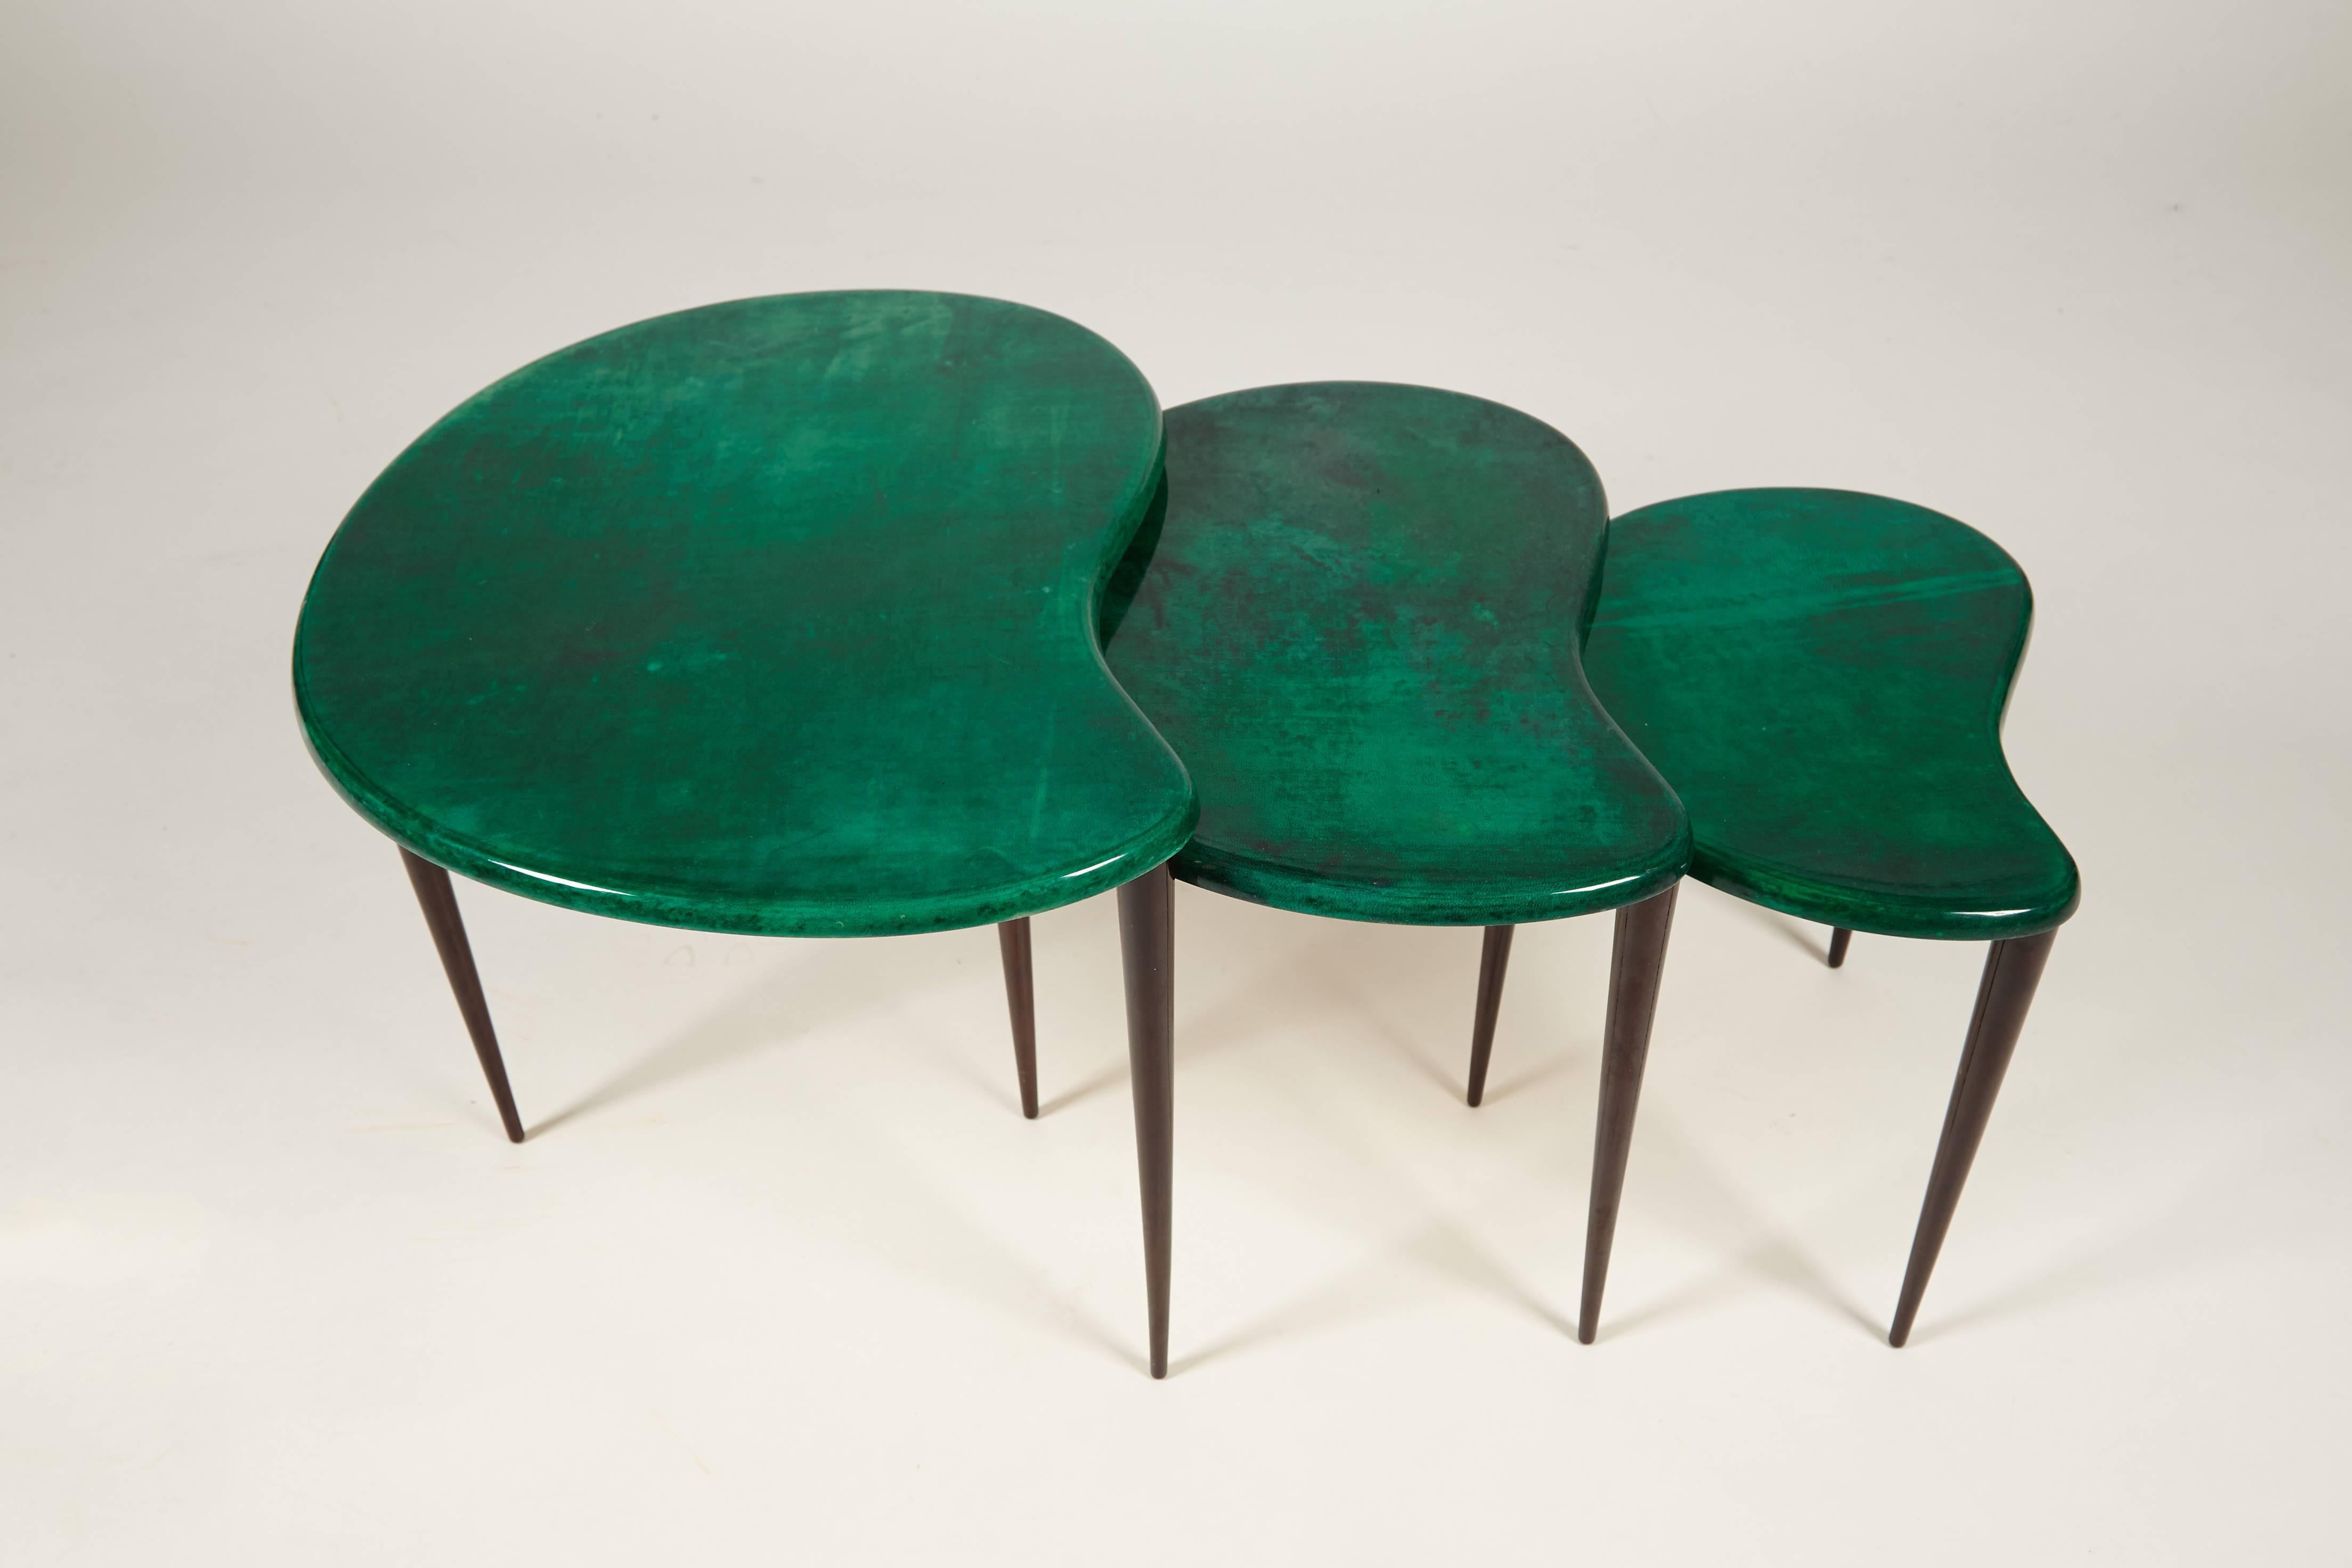 You are viewing a stunning set of three nesting tables by the great designer, Aldo Tura, Italy. The tables are from the early to mid-1960s and covered in a green dyed parchment and lacquered technic. A true signature of an Aldo Tura design.